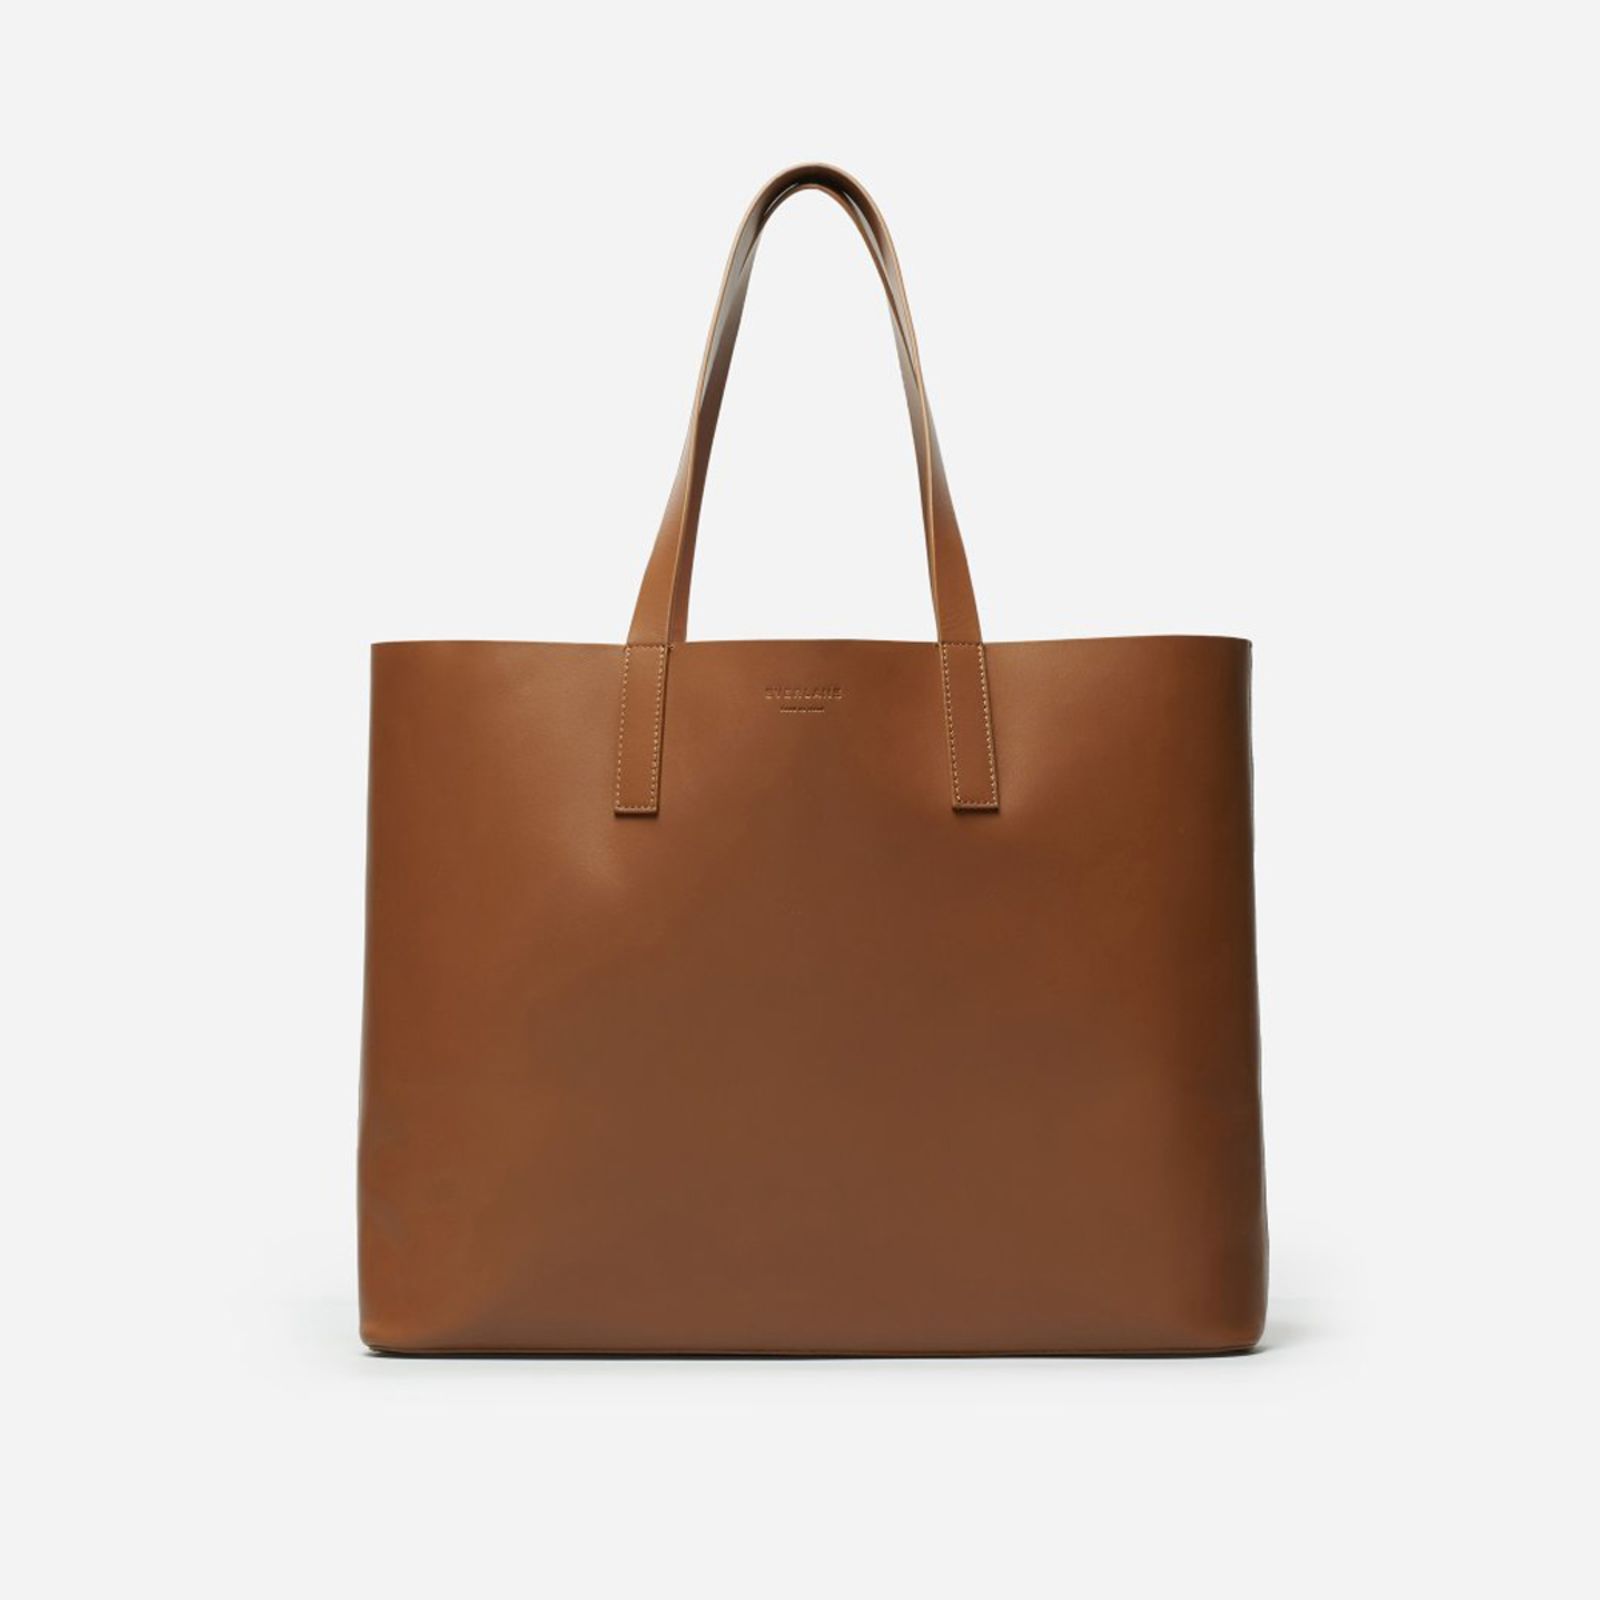 Women's Leather Market Tote Bag by Everlane in Cognac | Everlane